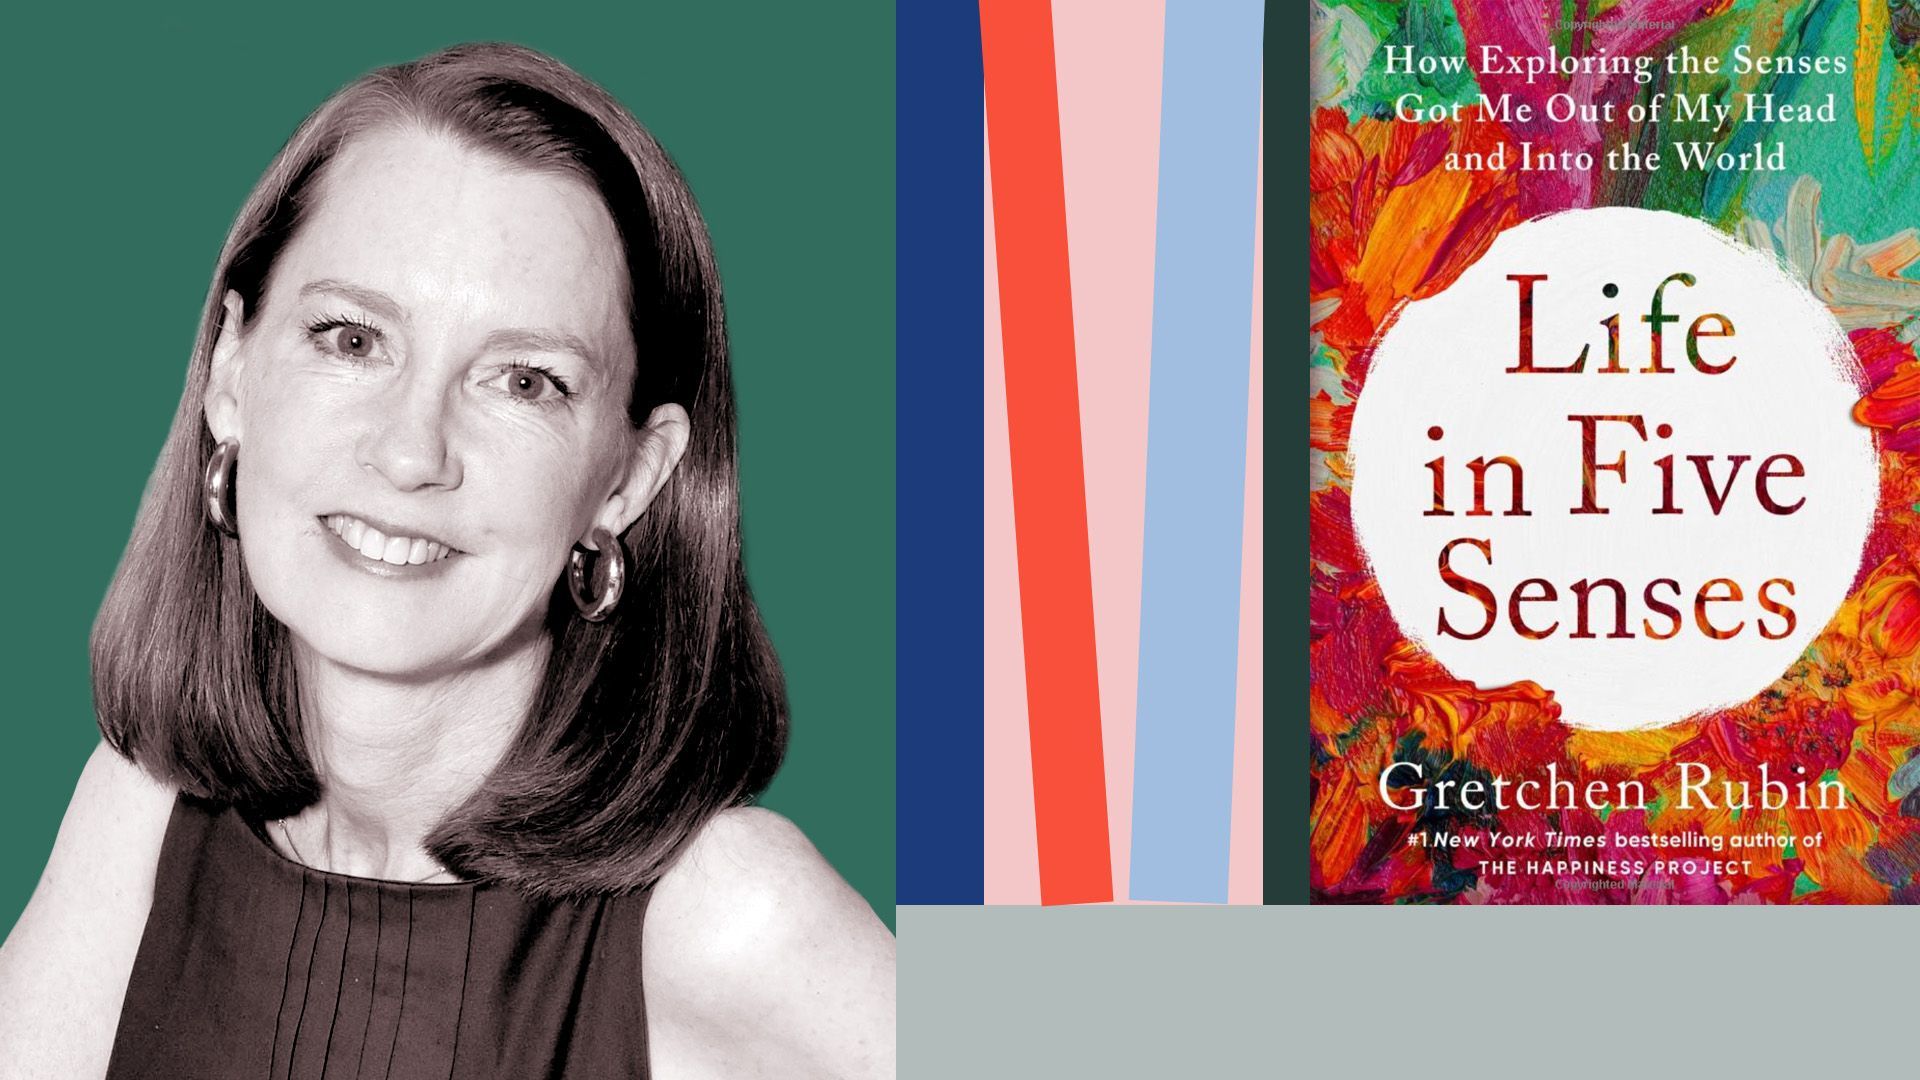 Photo illustration of author Gretchen Rubin with the cover of her new book "Life in Five Senses"